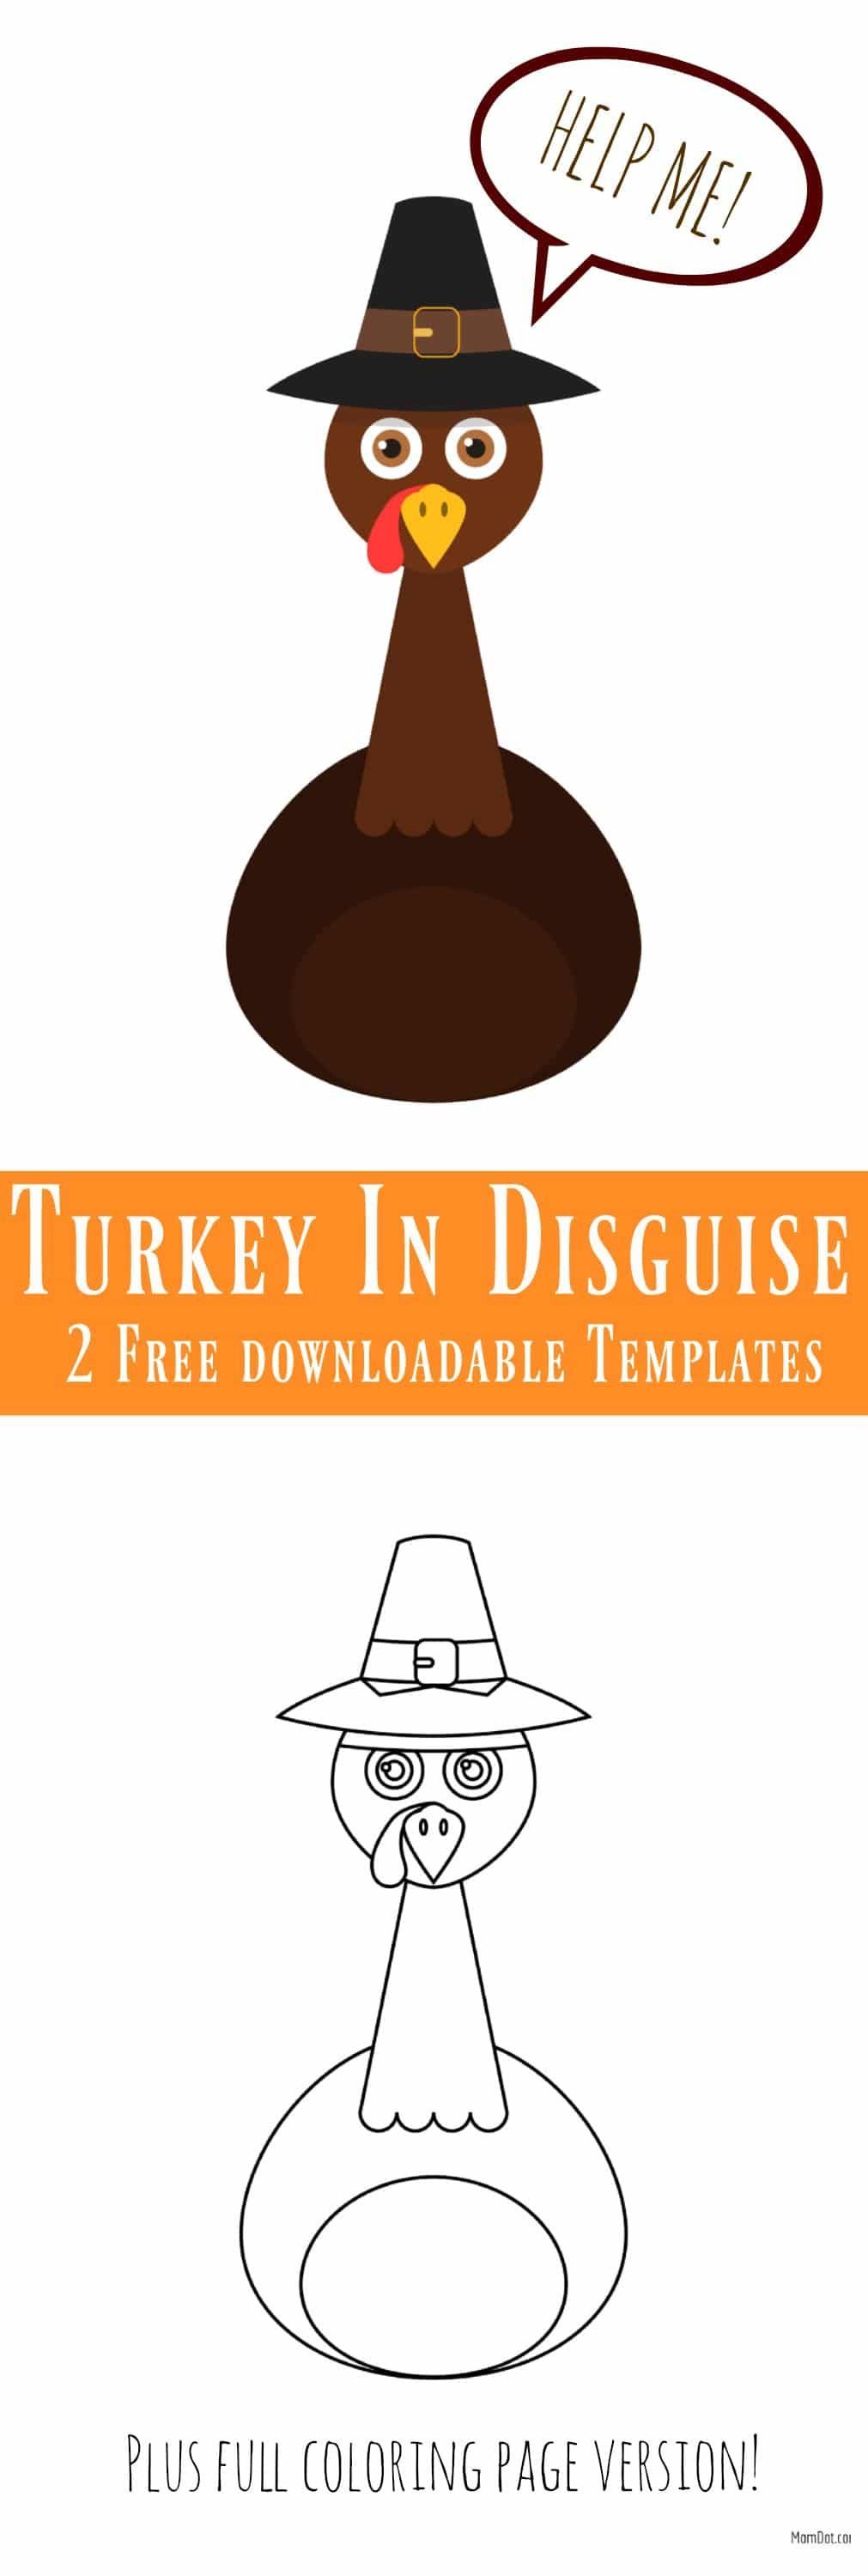 Turkey in Disguise Free Printable Template -   18 disguise a turkey project printable template ideas